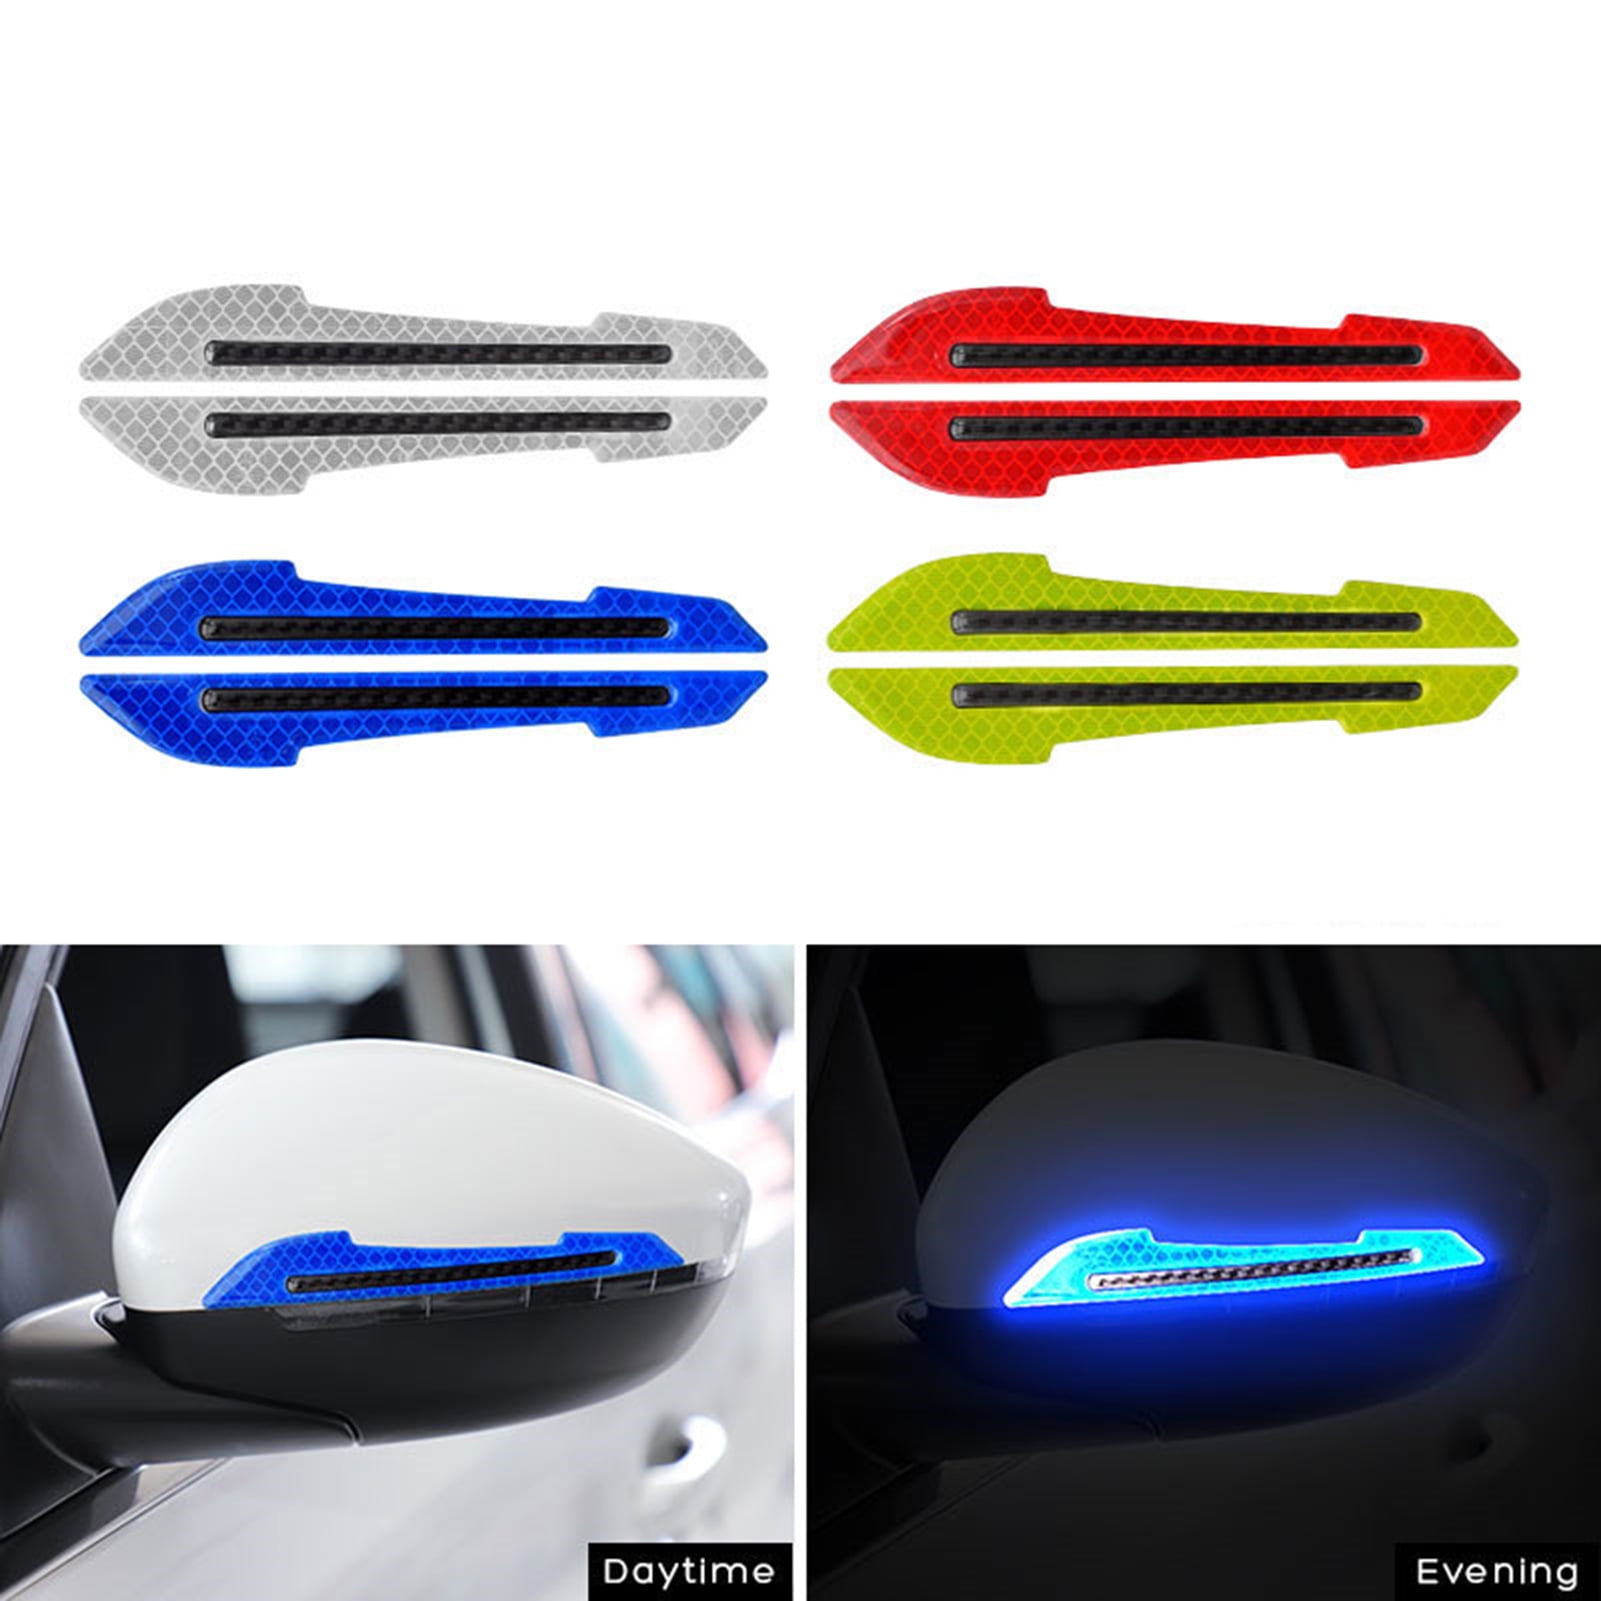 Details about   2pcs/pack Reflective Tape Vehicle Decal Body Warning Mark Car Sticker Accessory 